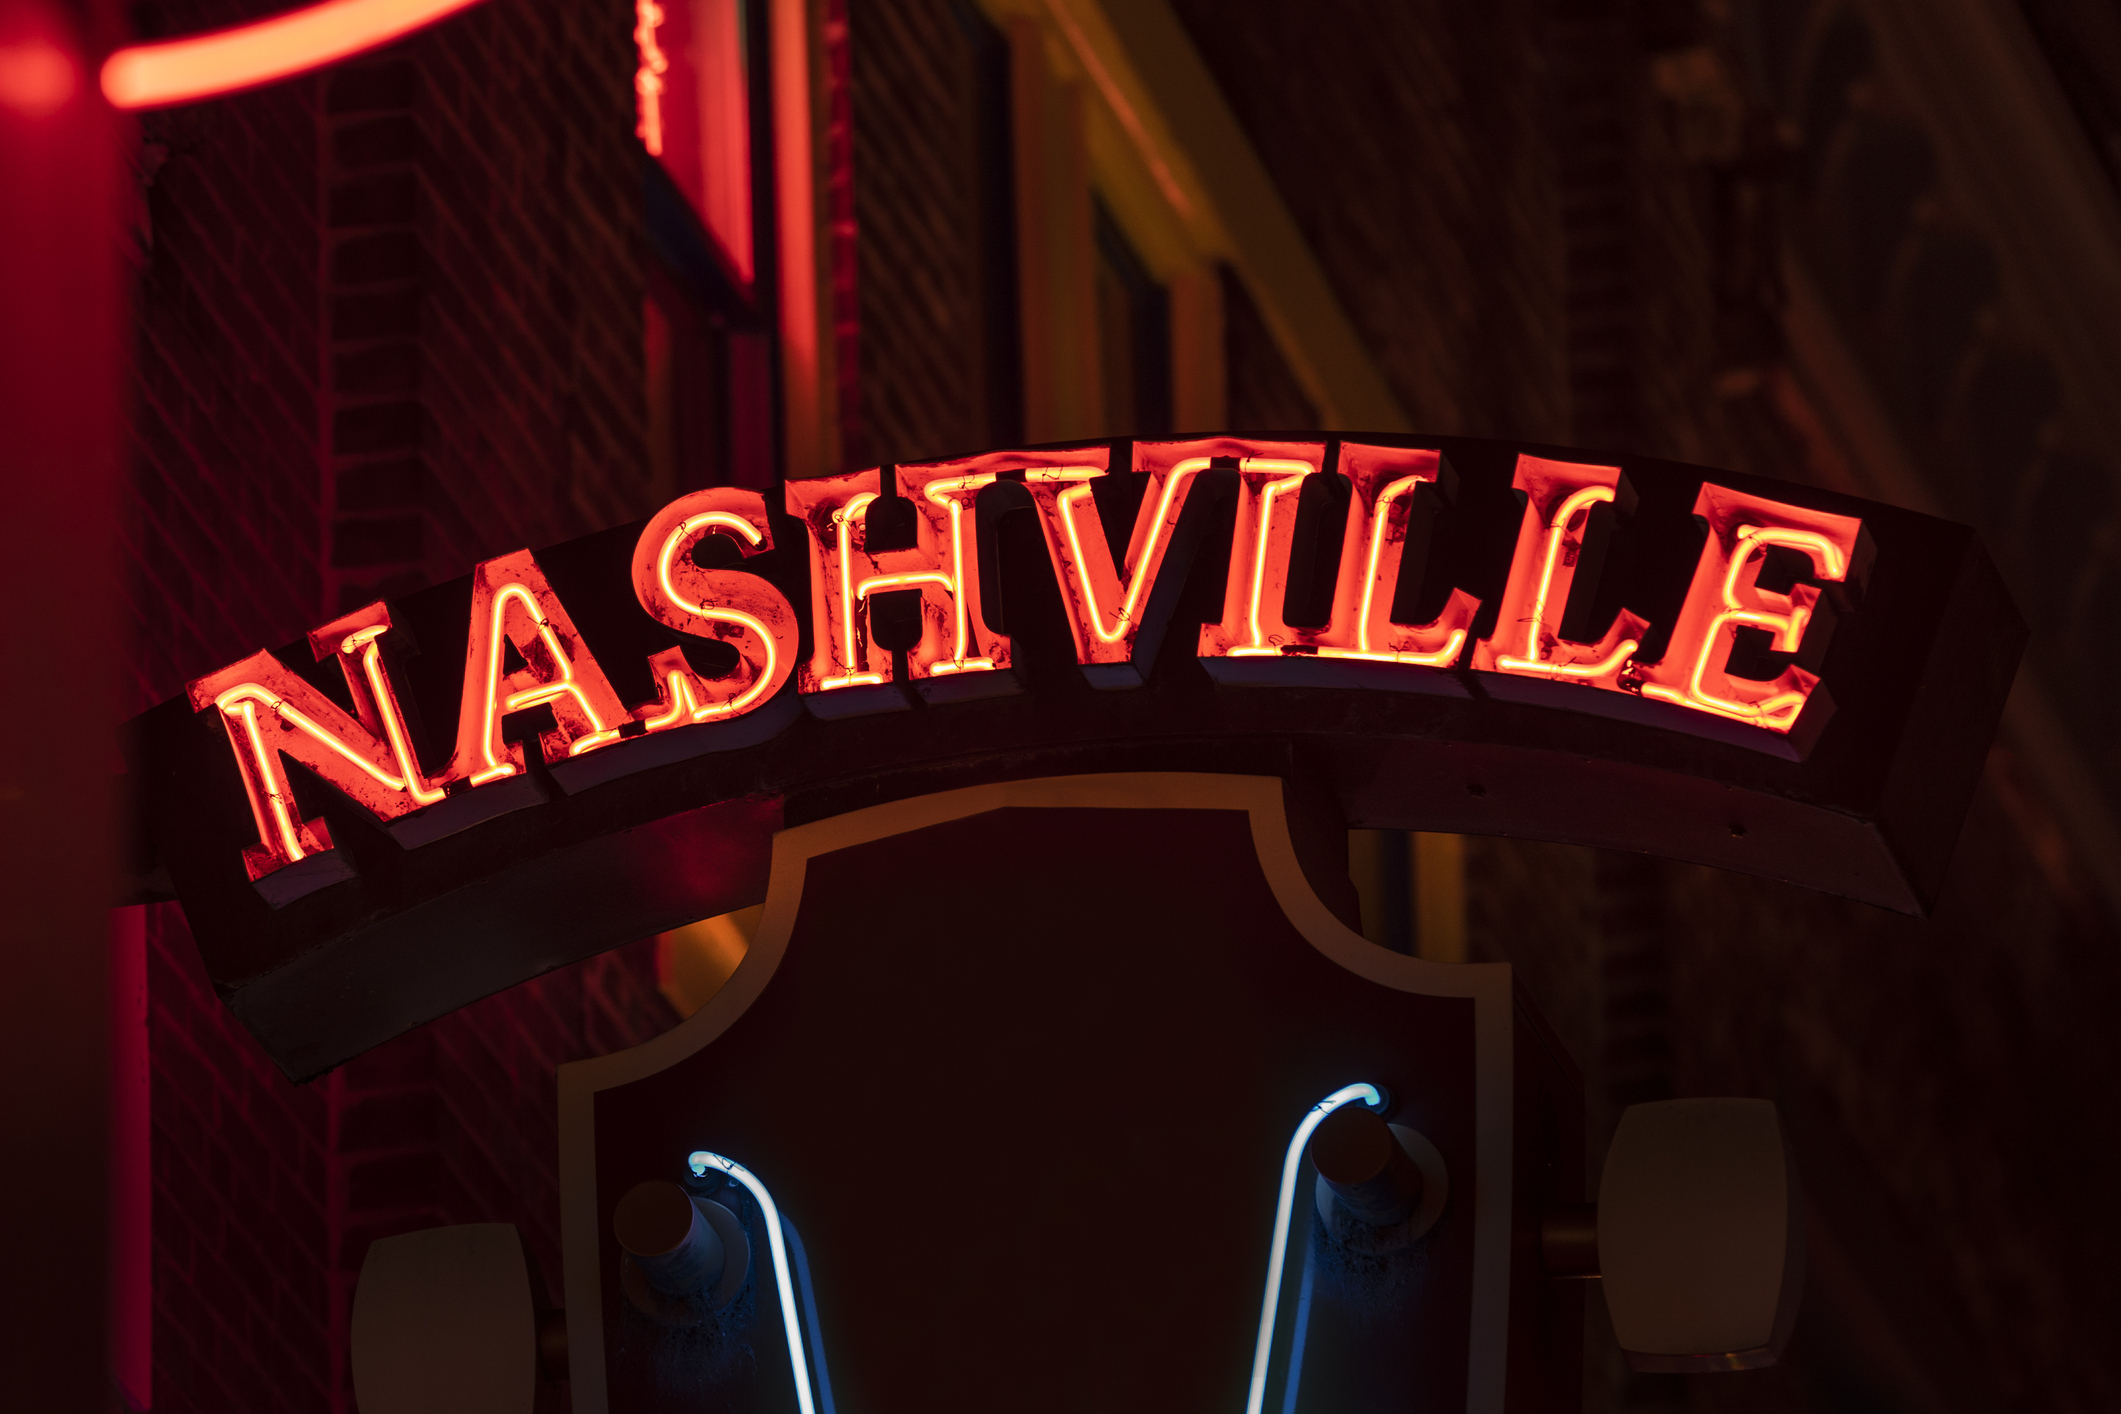 Neon sign reading &#x27;NASHVILLE&#x27; at night, likely indicating the city&#x27;s vibrant scene